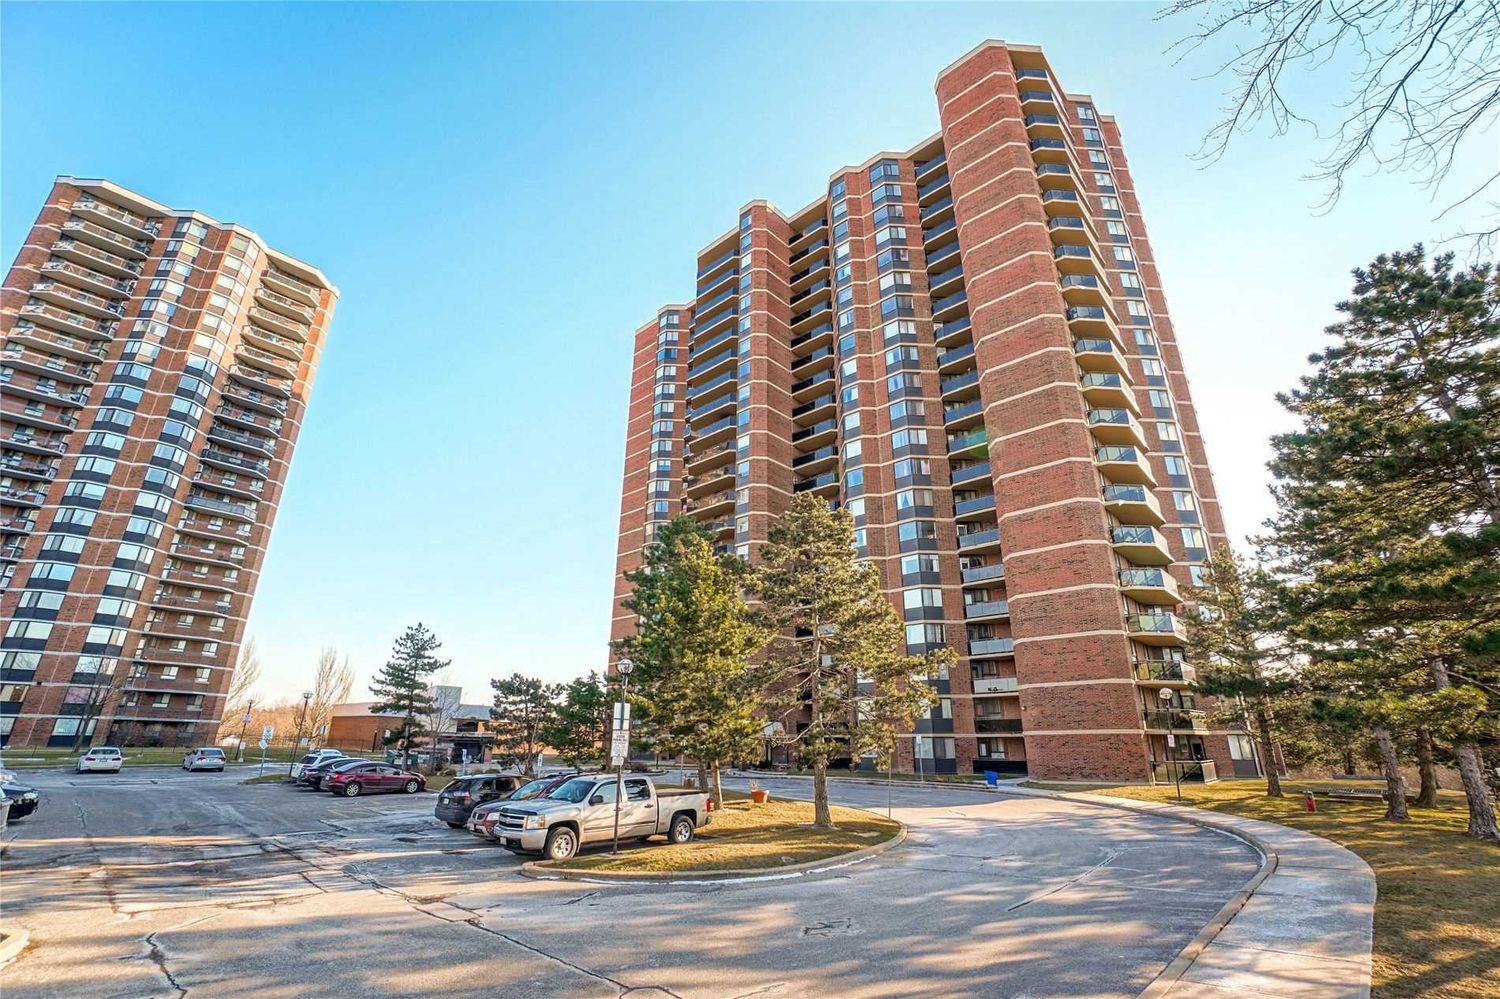 234 Albion Road. Twin Towers Condos is located in  Etobicoke, Toronto - image #3 of 3